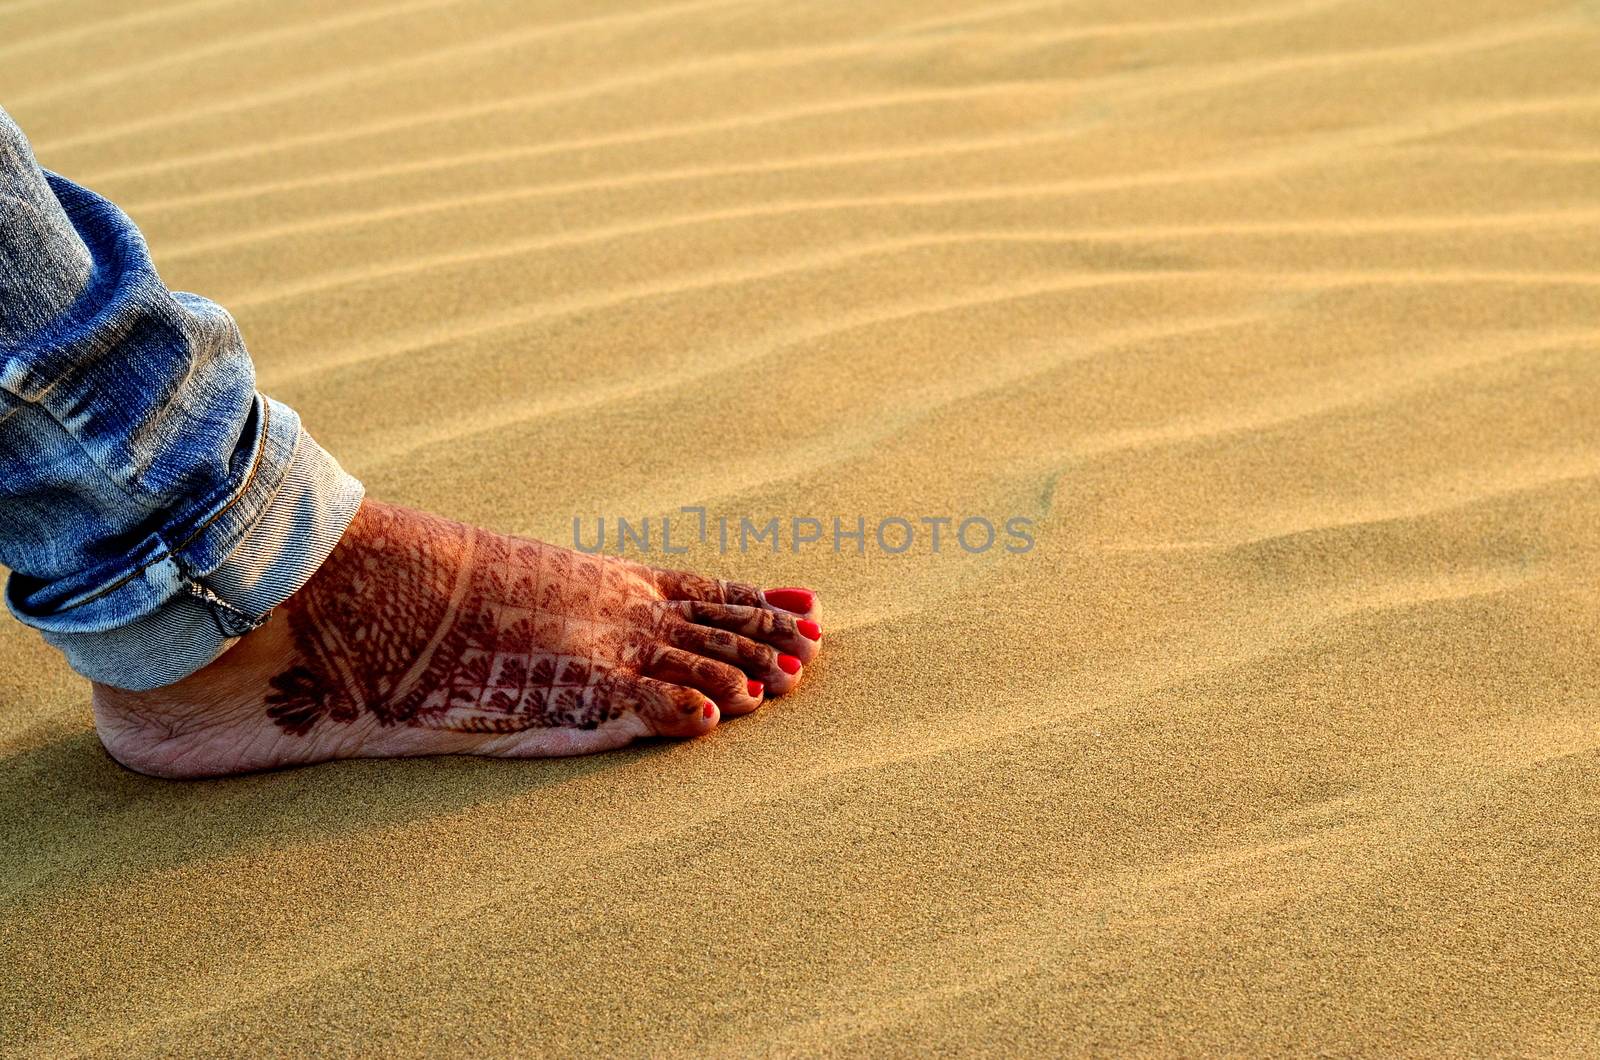 A newly married woman showing her foot with henna design in Sam Sand Dune, Thar desert, Jaisalmer, Rajasthan, India. Indian women apply henna on their feet and hands as a part of their wedding ritual